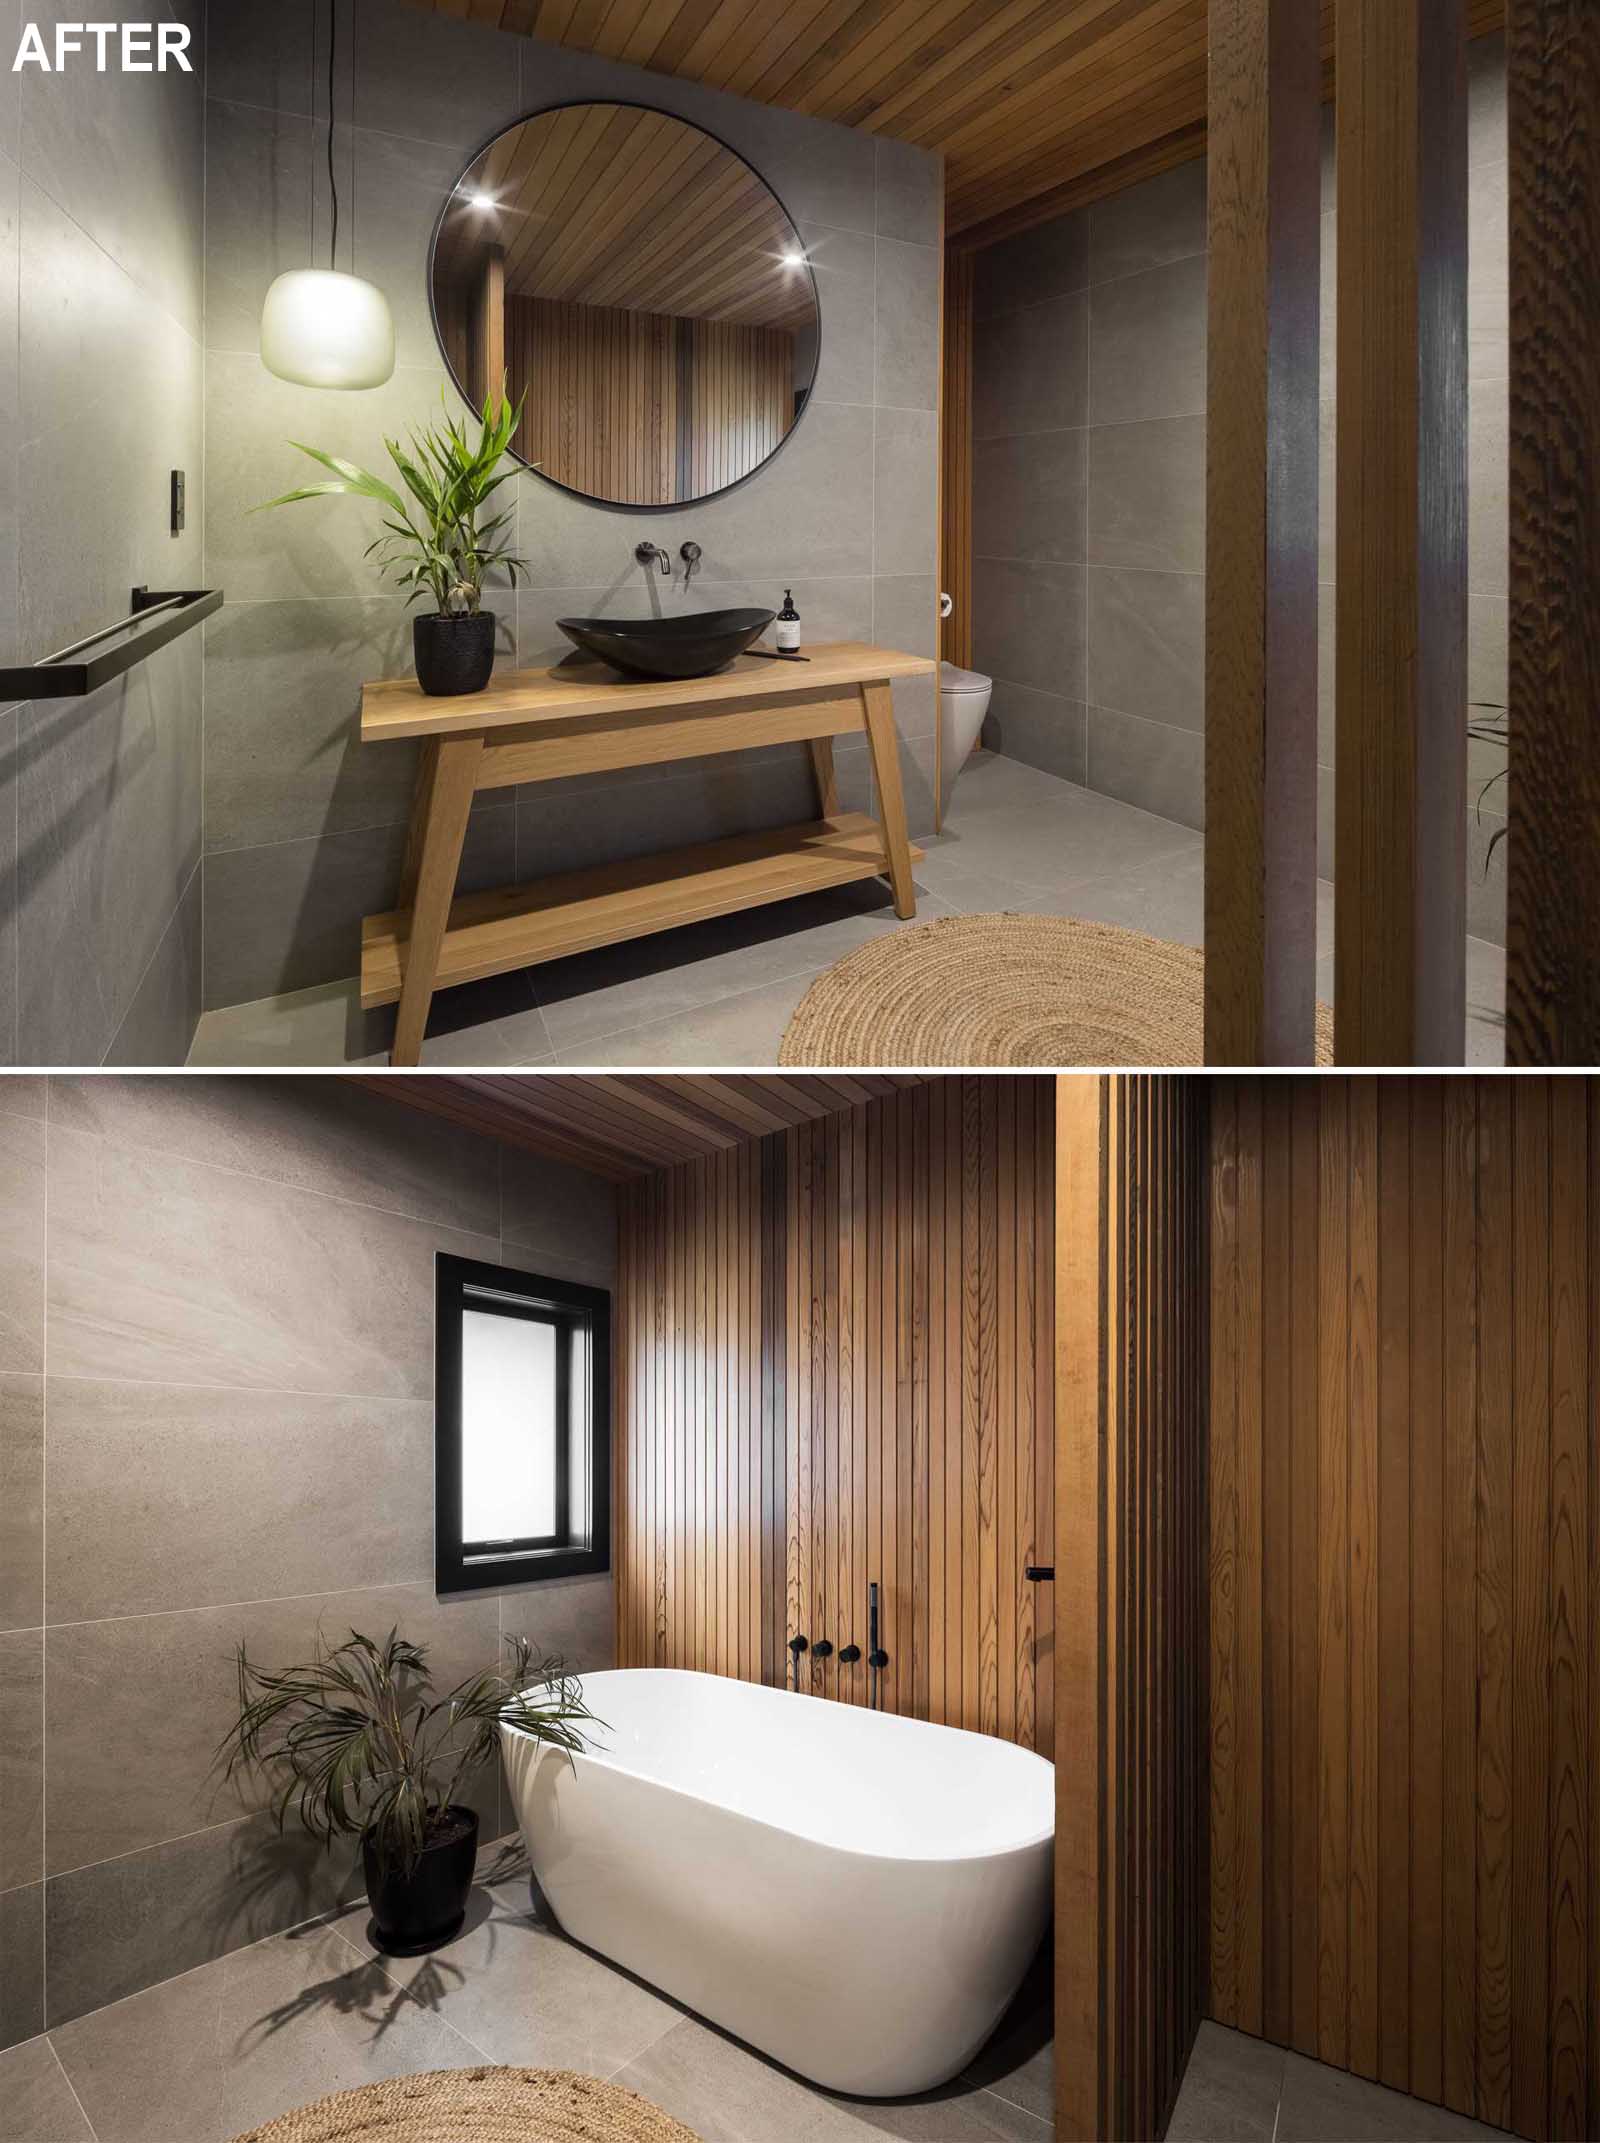 A modern and spa-like bathroom, with natural wood elements, large format tiles, and a freestanding bathtub with wood accent wall.